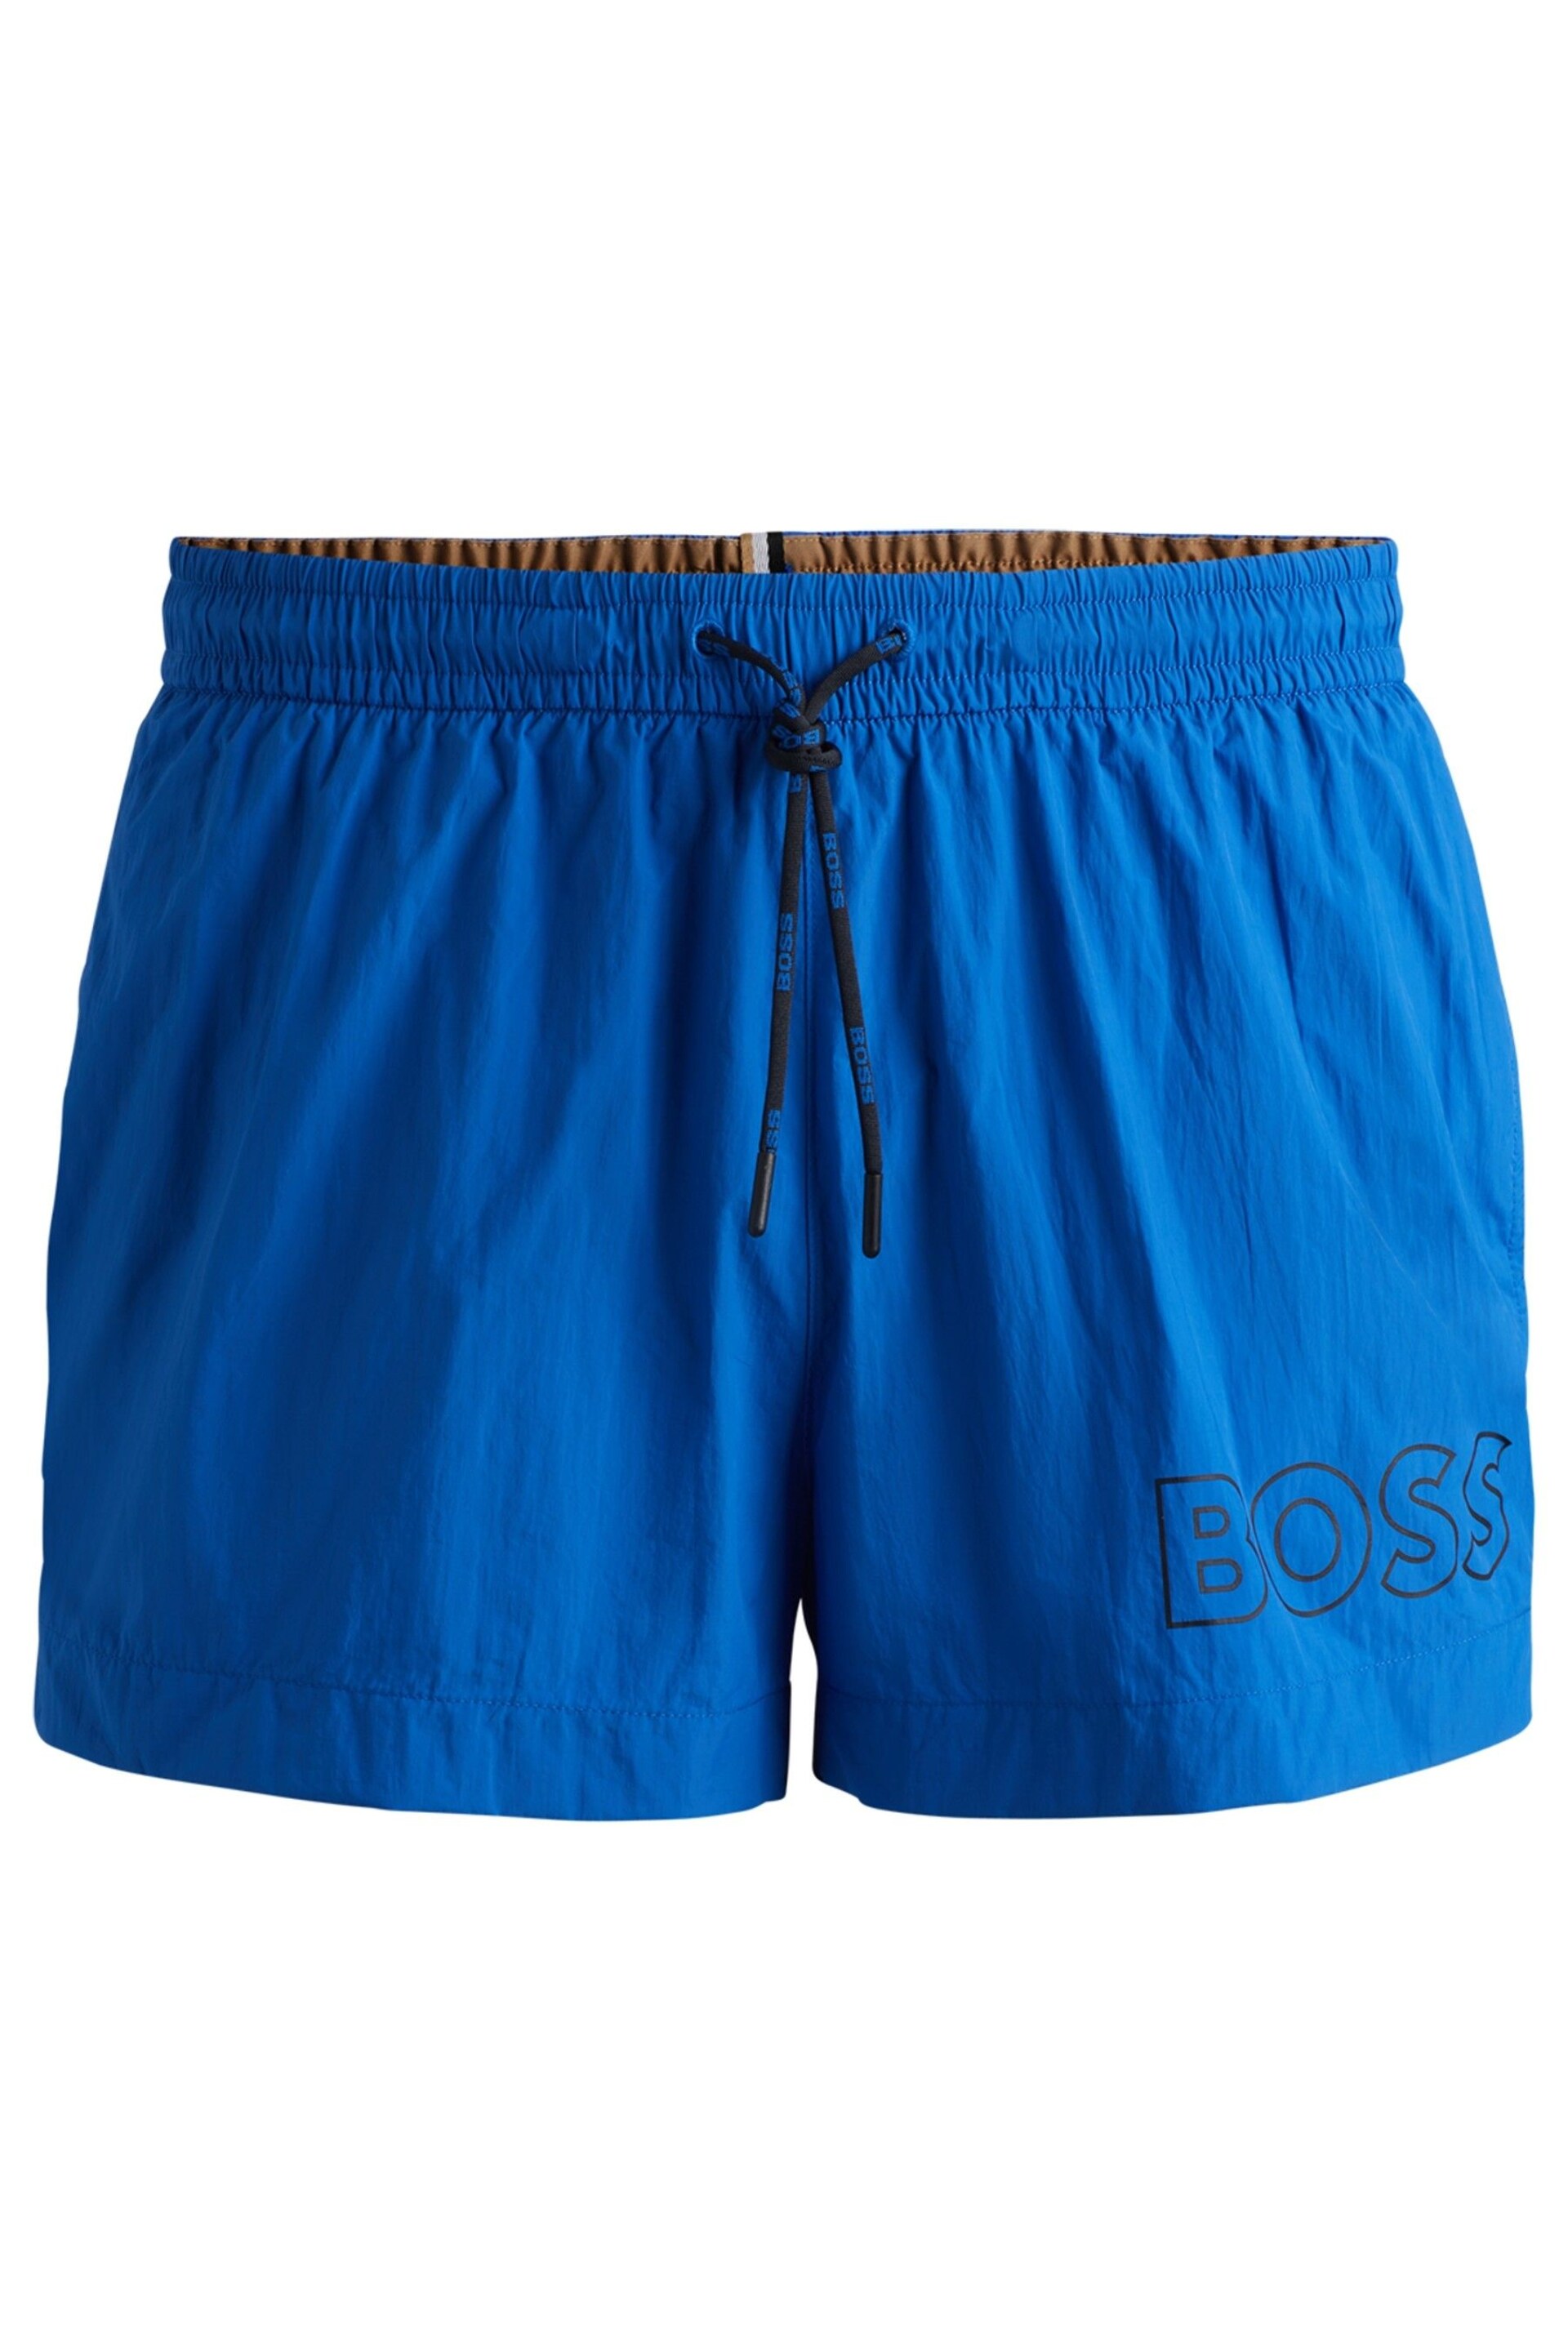 BOSS Blue Quick-Dry Outlined Logo Swim Shorts - Image 4 of 4